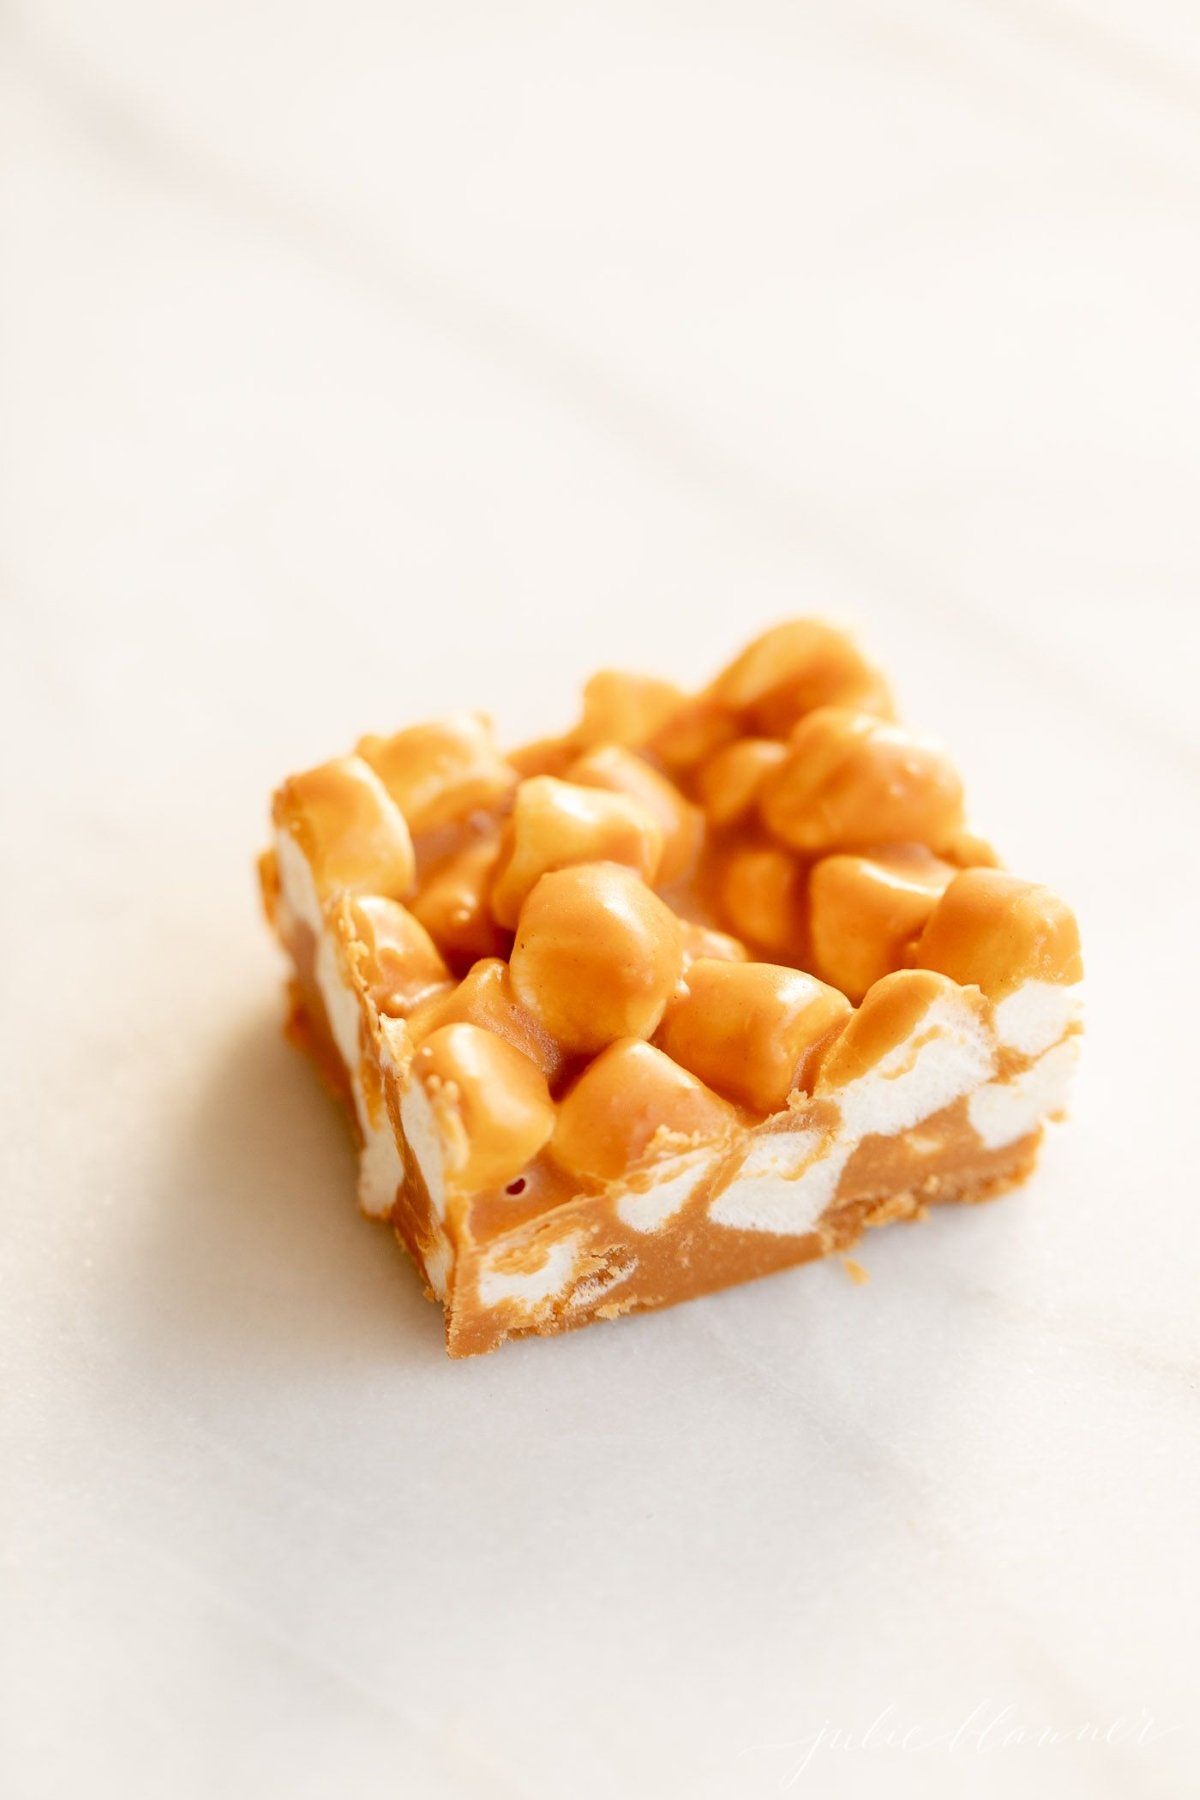 A butterscotch and marshmallow bar on a marble countertop.